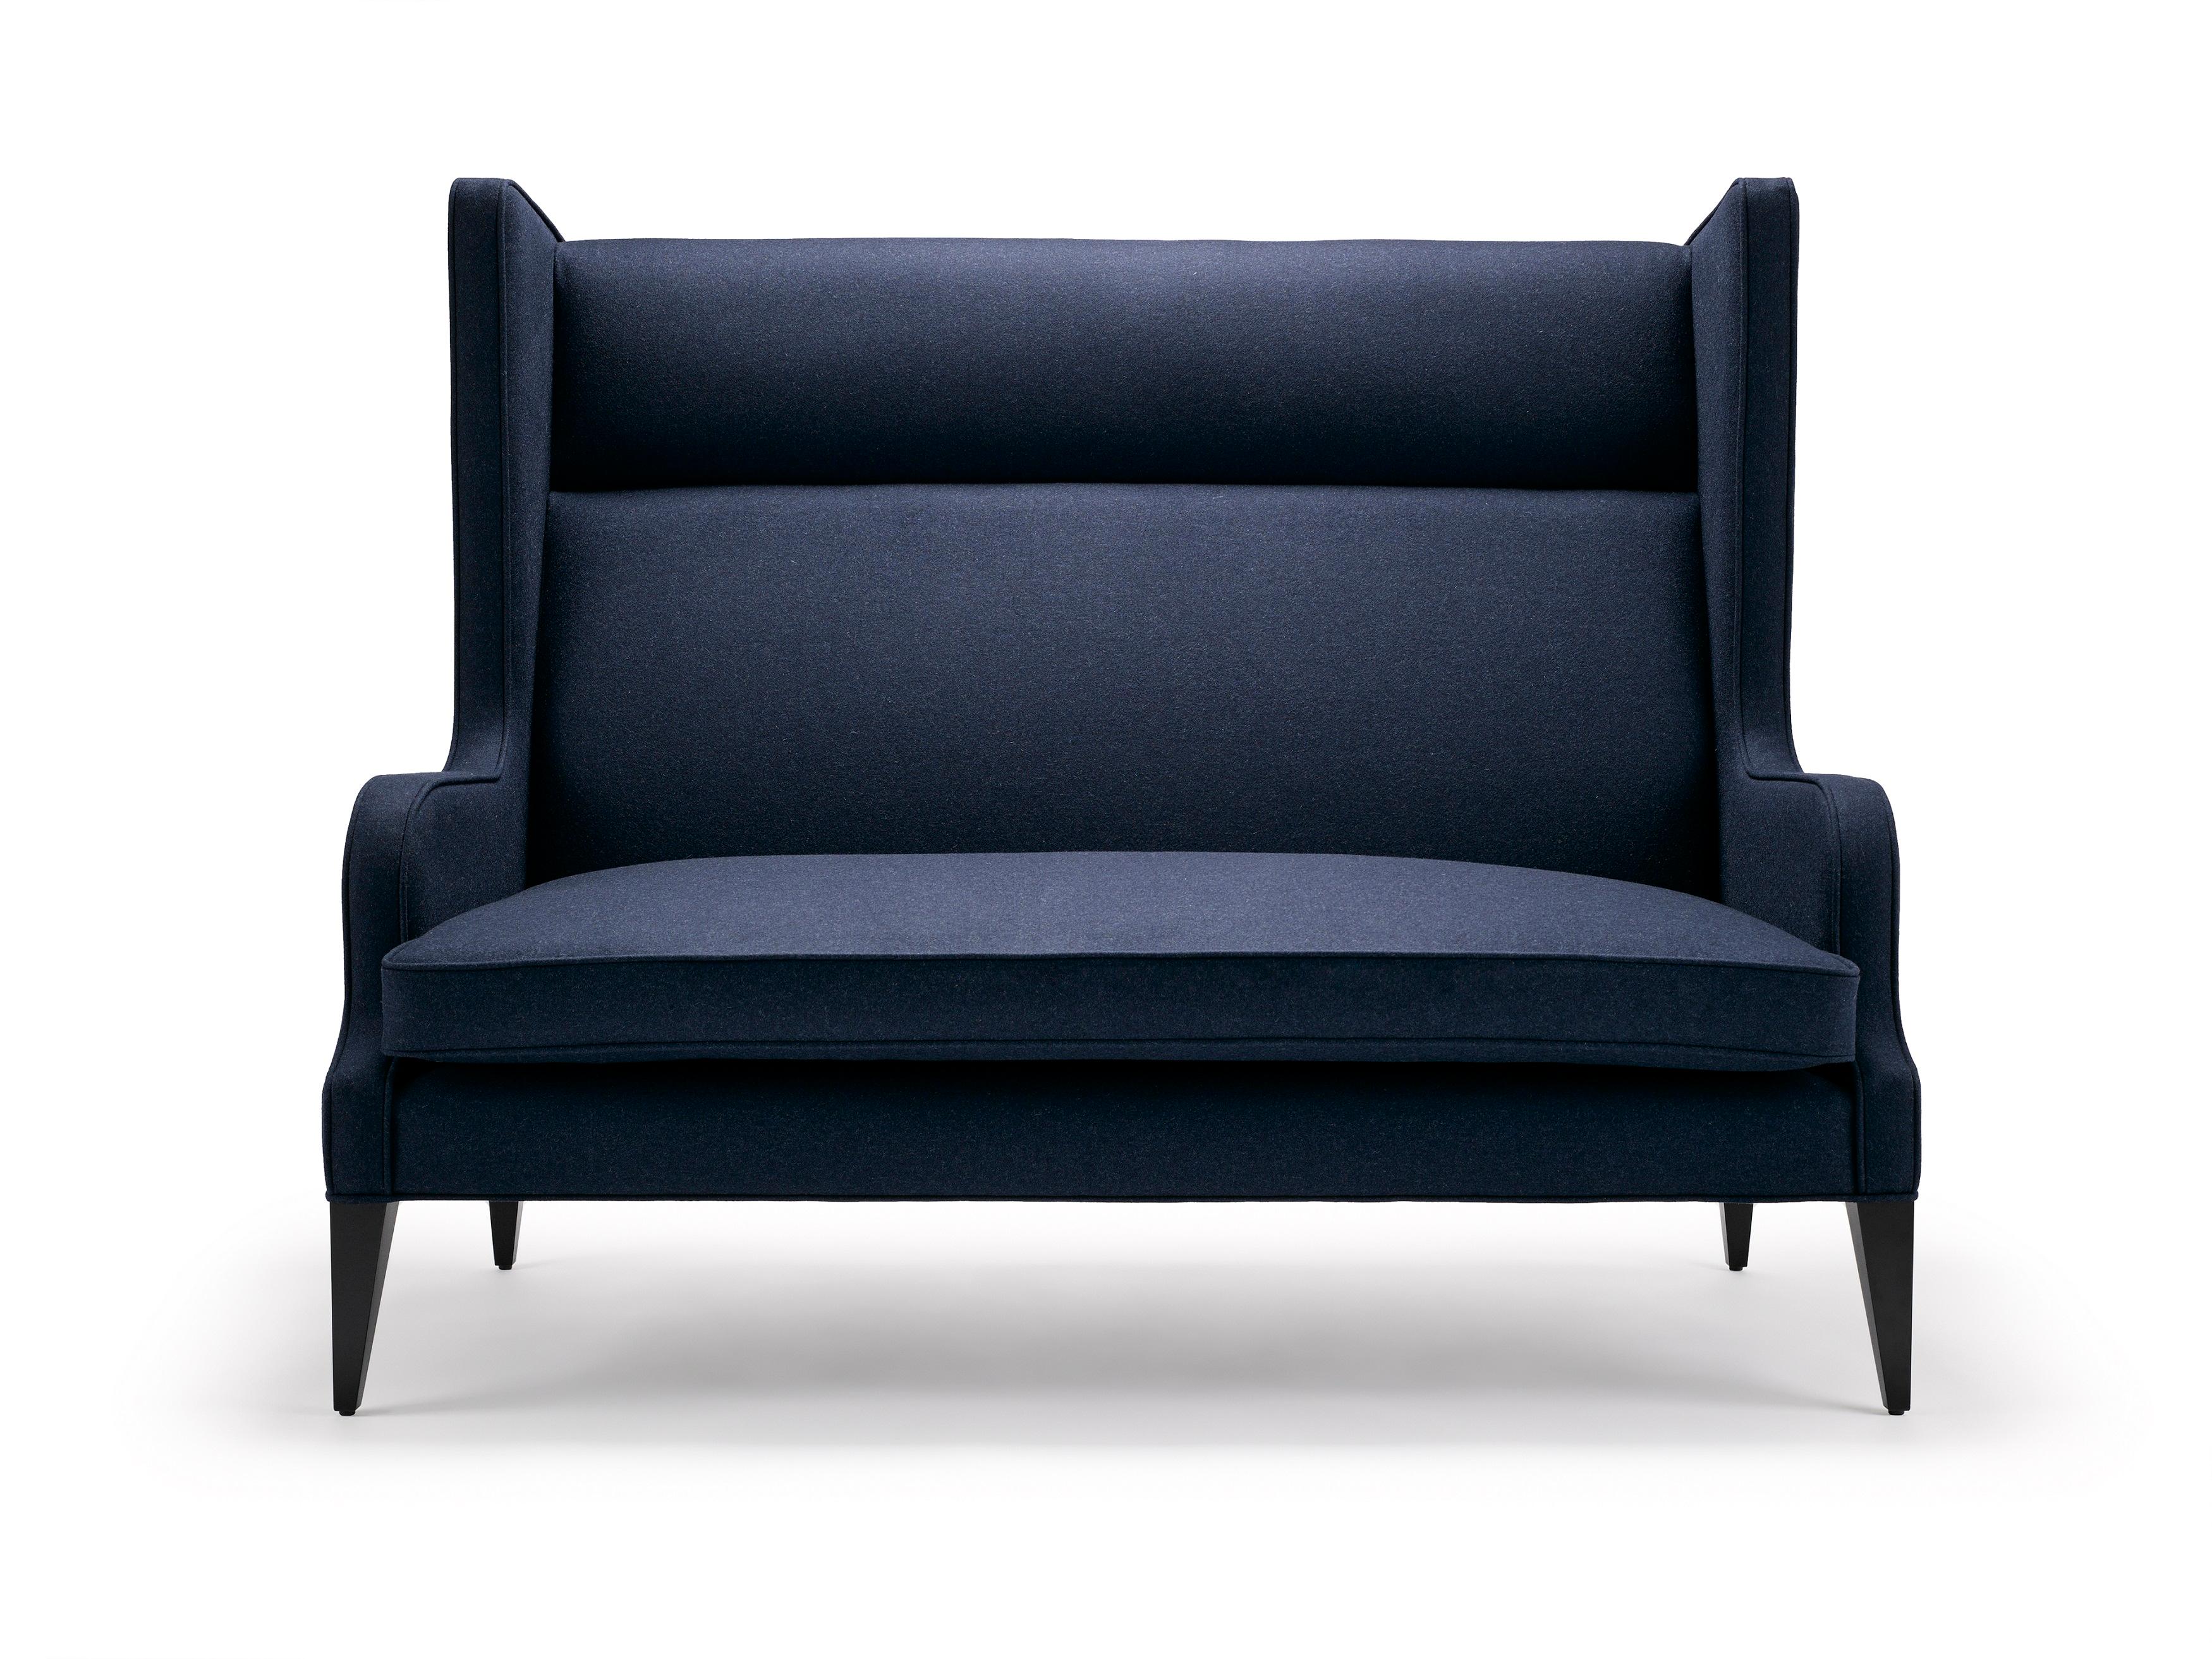 With its fluid lines and subtle angles, we have our Alae Wing Sofa.

Construction: Solid seasoned beech frame, with a sprung seat and webbed back with a feather and down wrapped CMHR foam seat cushion.

Each Stuart Scott piece is built by hand in